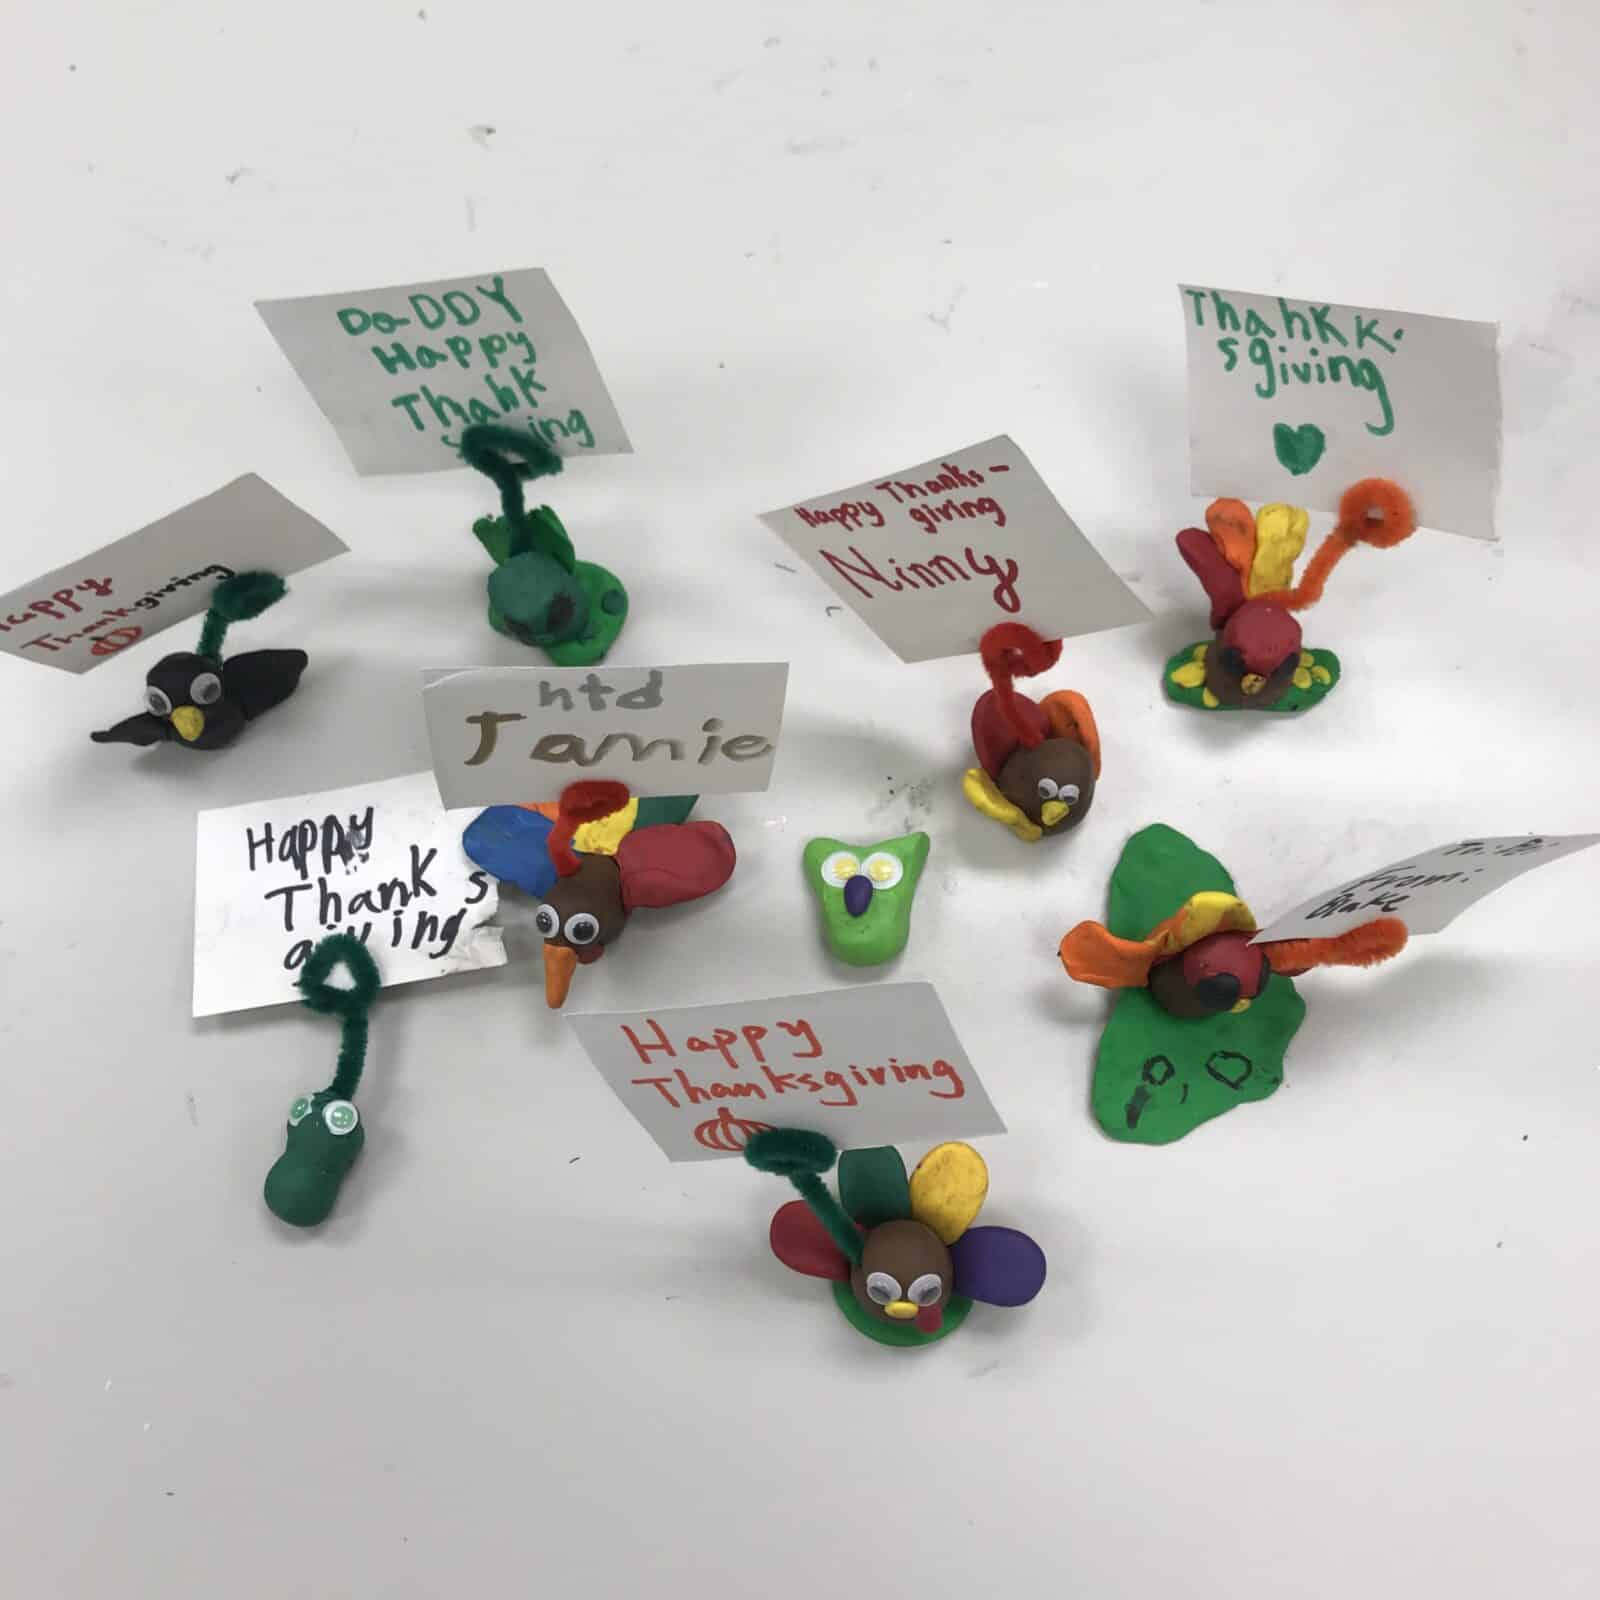 Clay crafts with Happy Thanks giving message